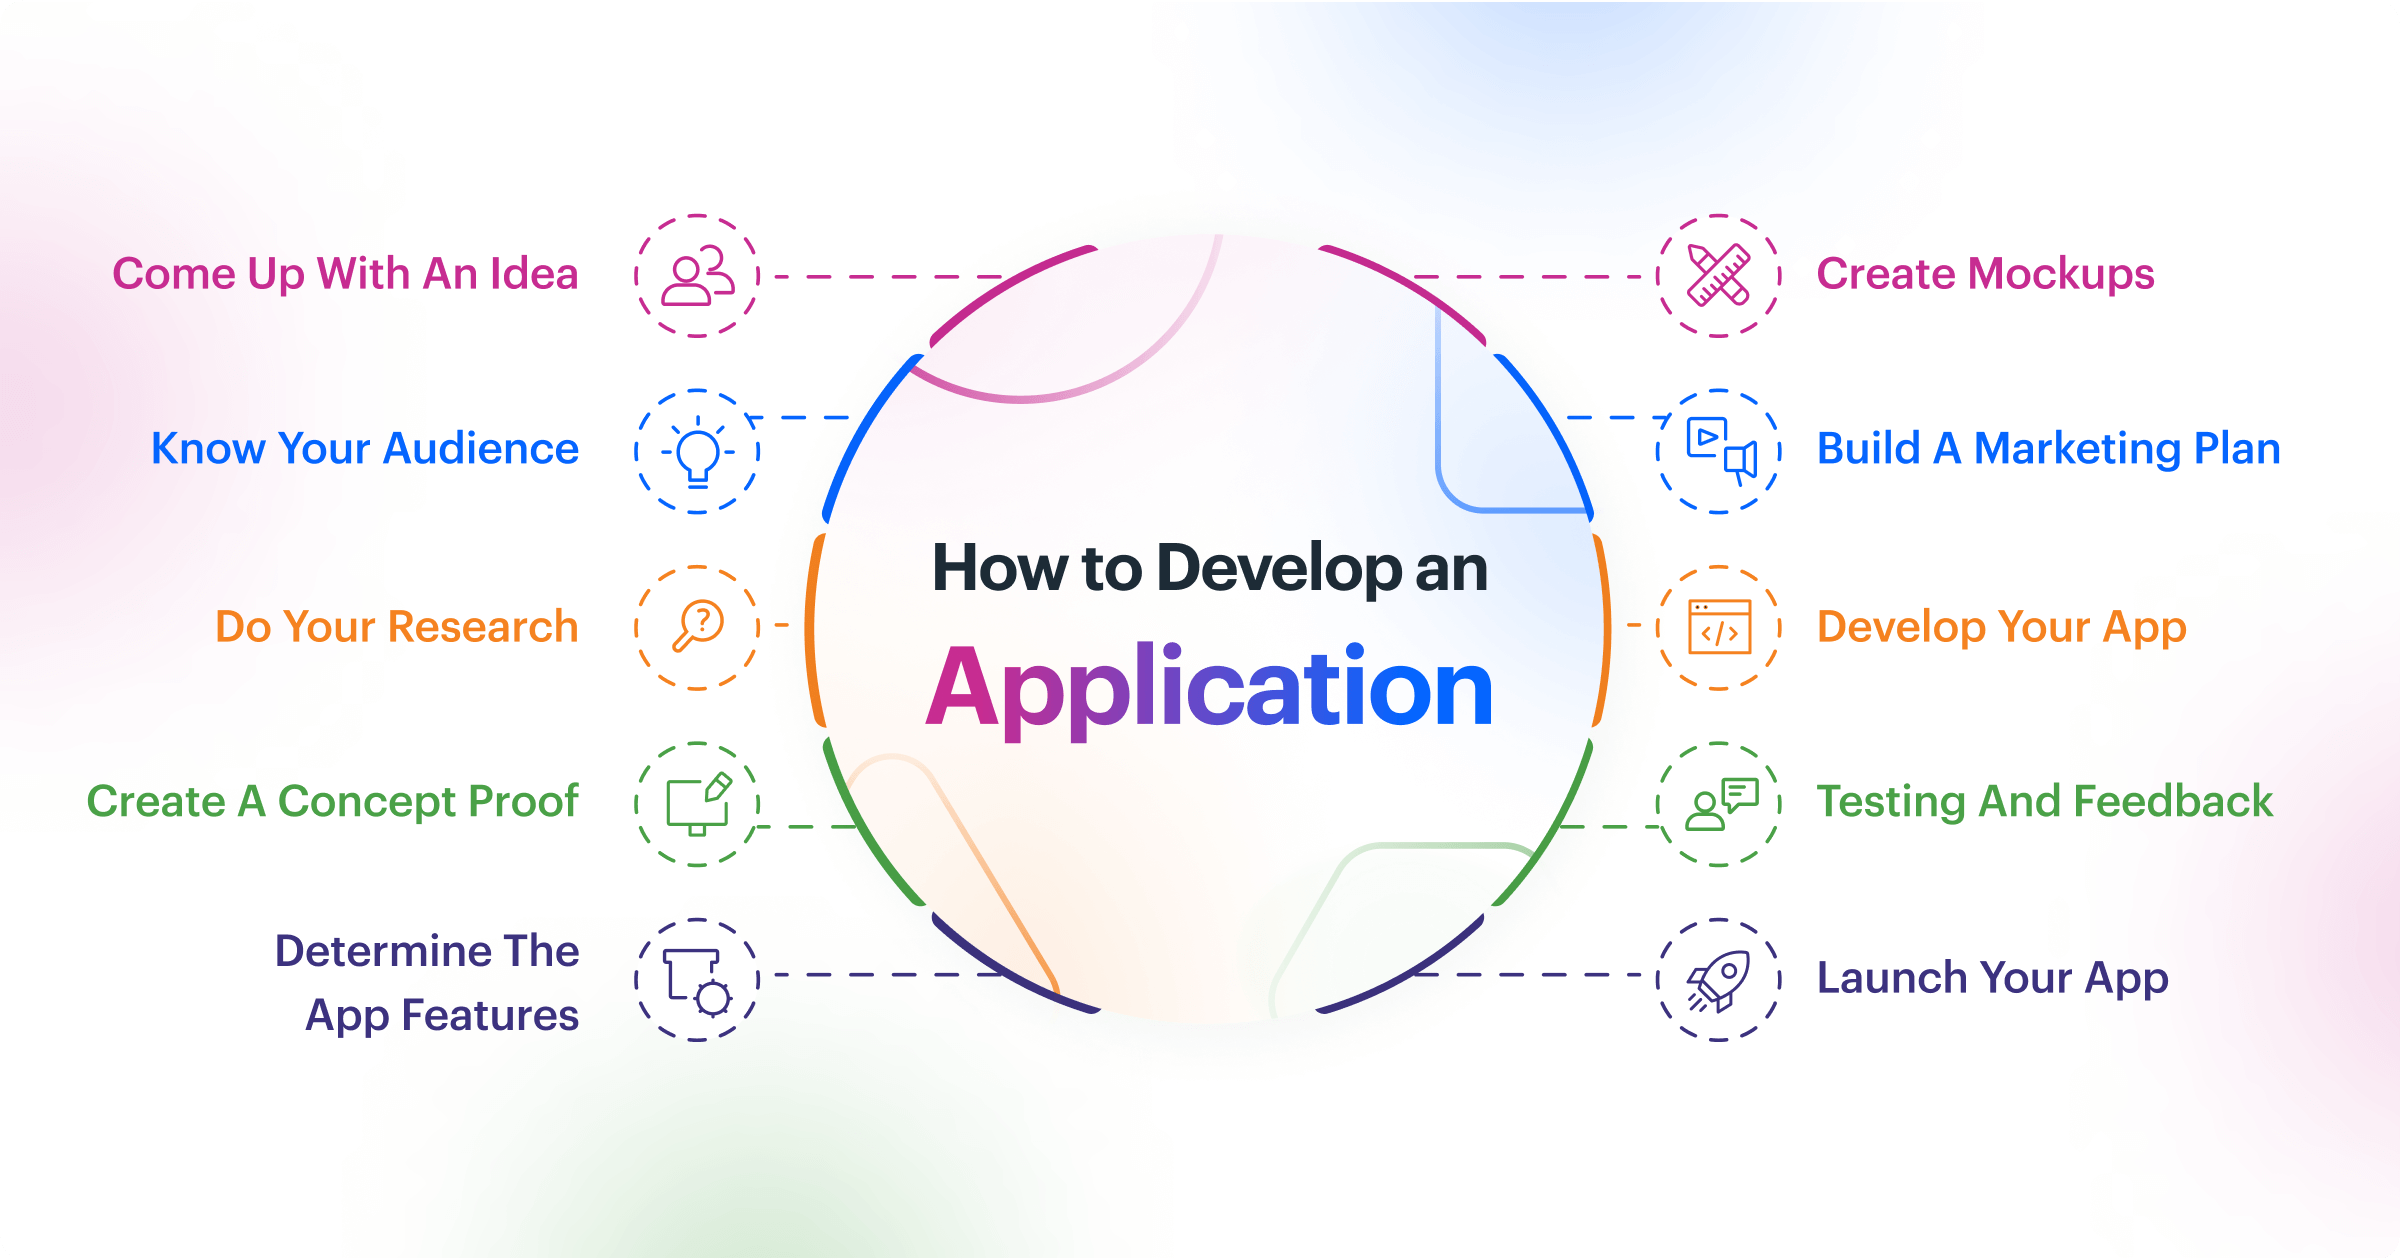 How to Develop an Application